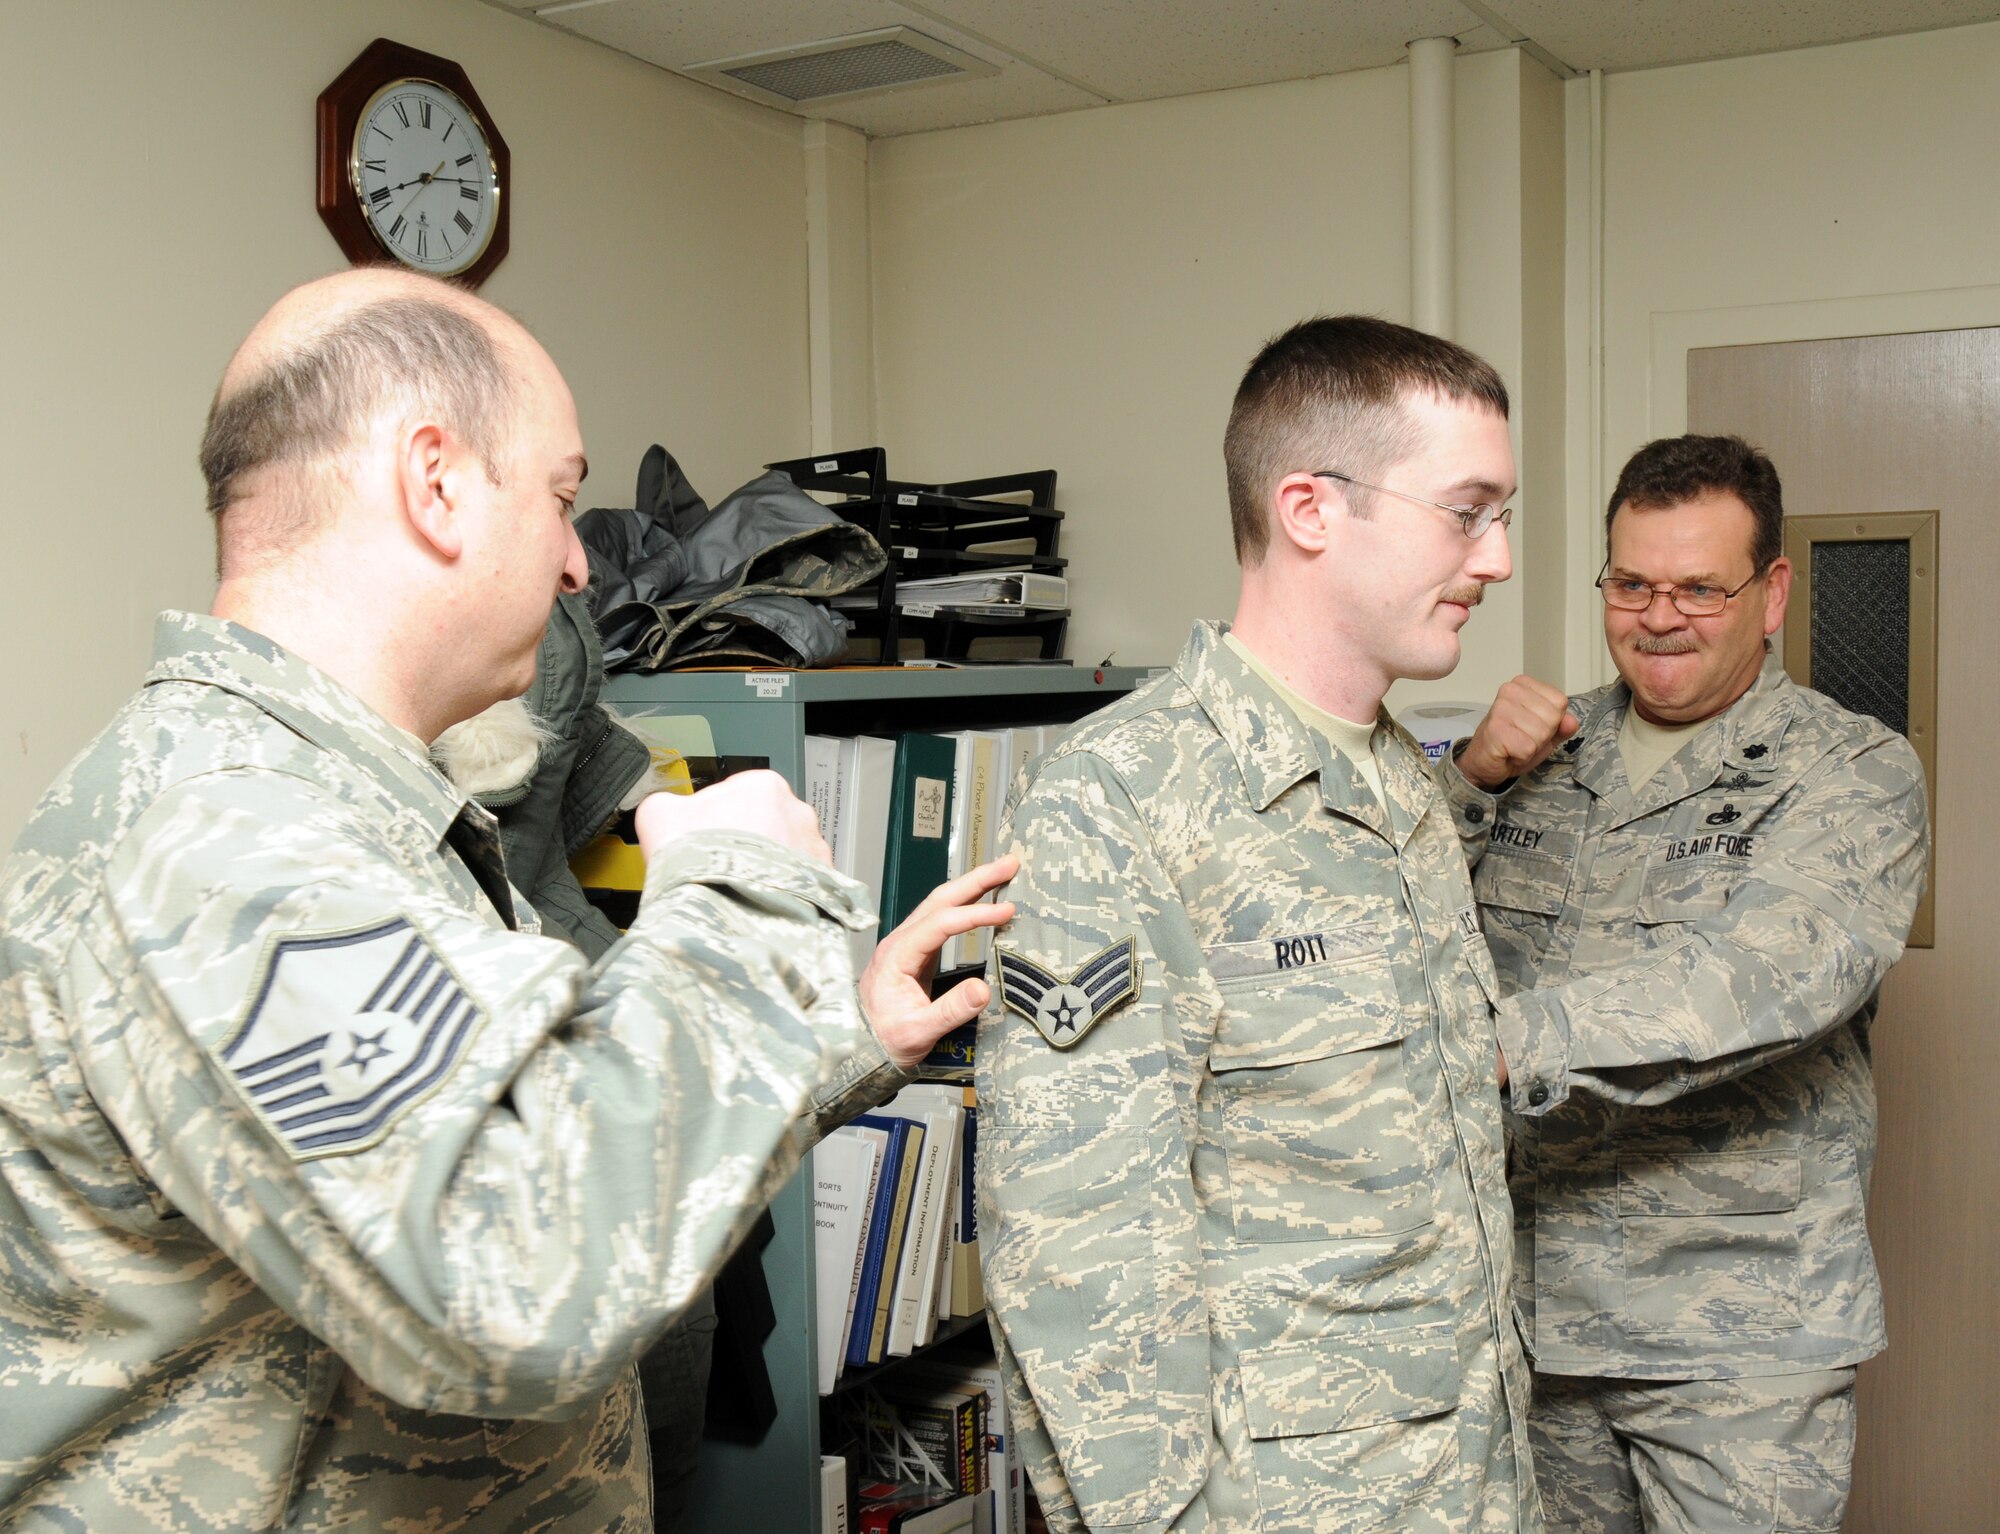 Airman 1st Class Philip Rott from the 107th AW Communications Flight is promoted to senior airman by Master Sgt. Joel Micoli (on left) and Lt. Col. Doug Hartley (on right). (U.S. Air Force photo/Tech. Sgt. Justin Huett)